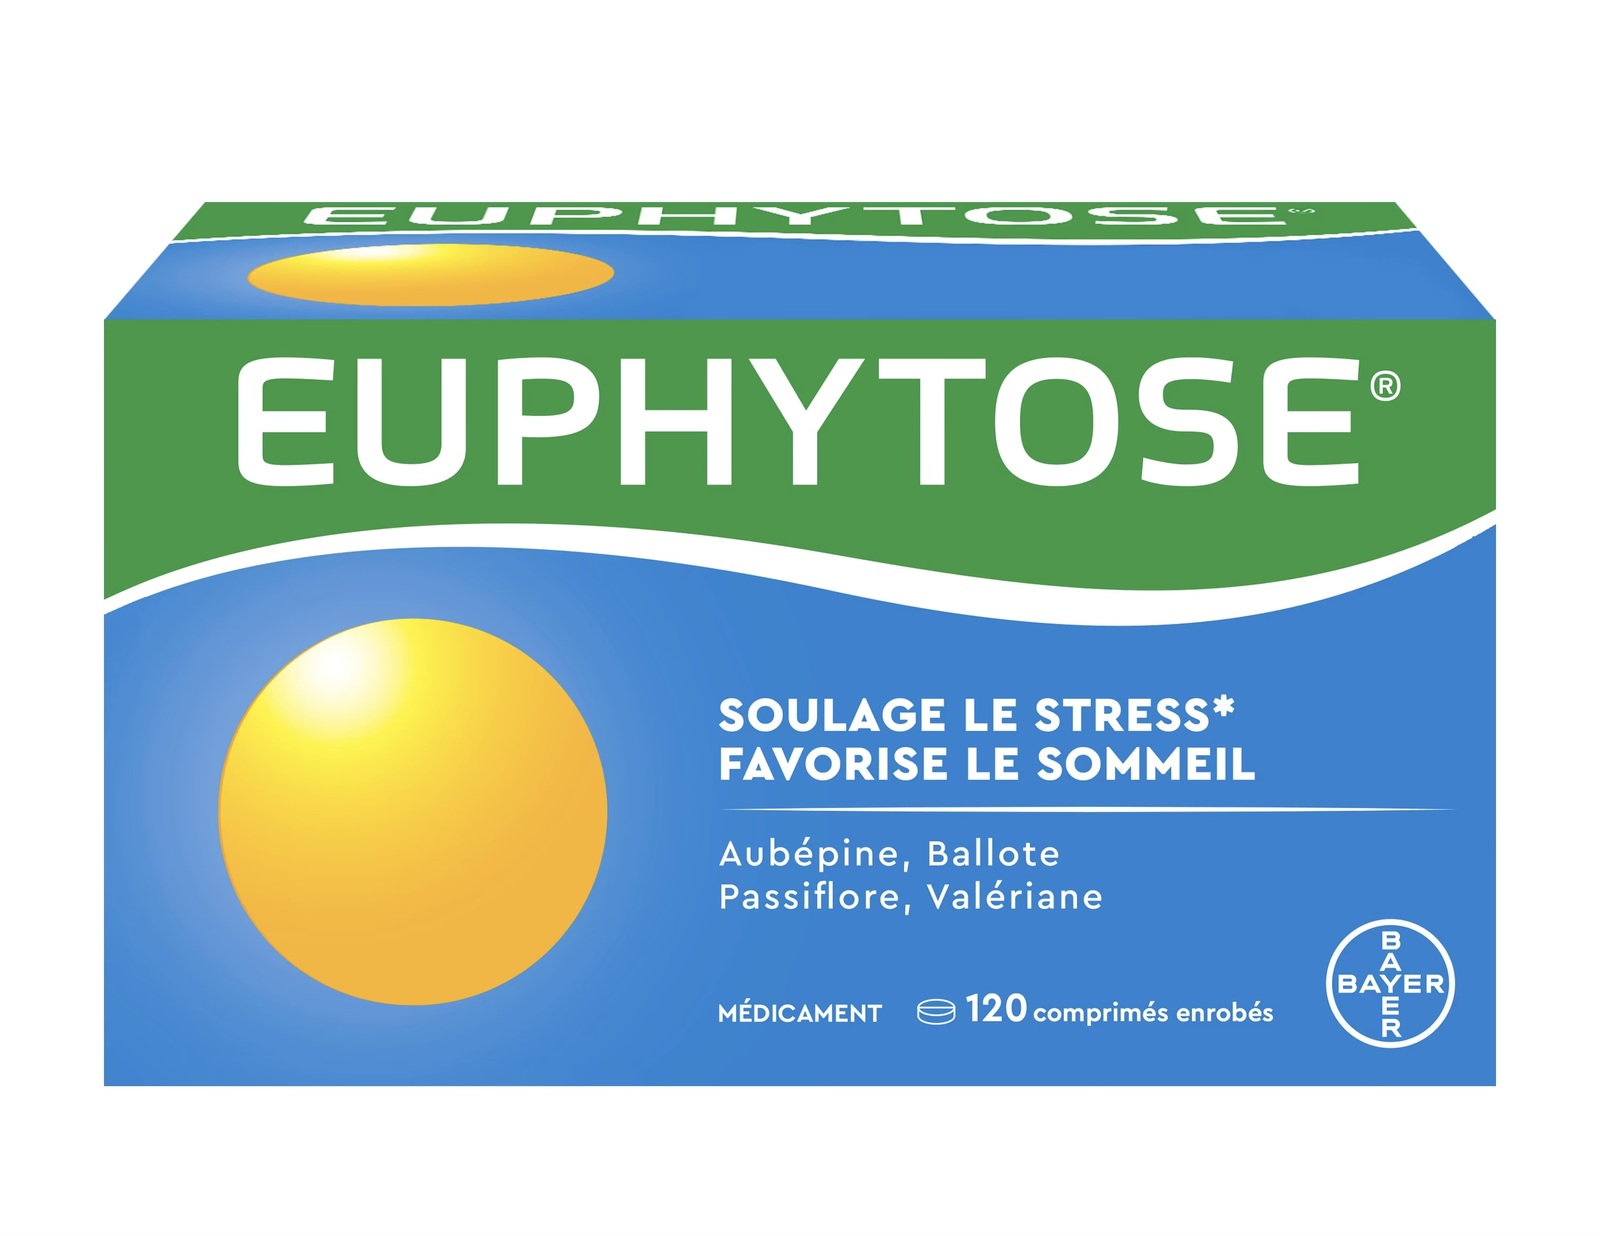 Primary image for Euphytose for Better Sleep-Pack of 180 Tablets By Bayer